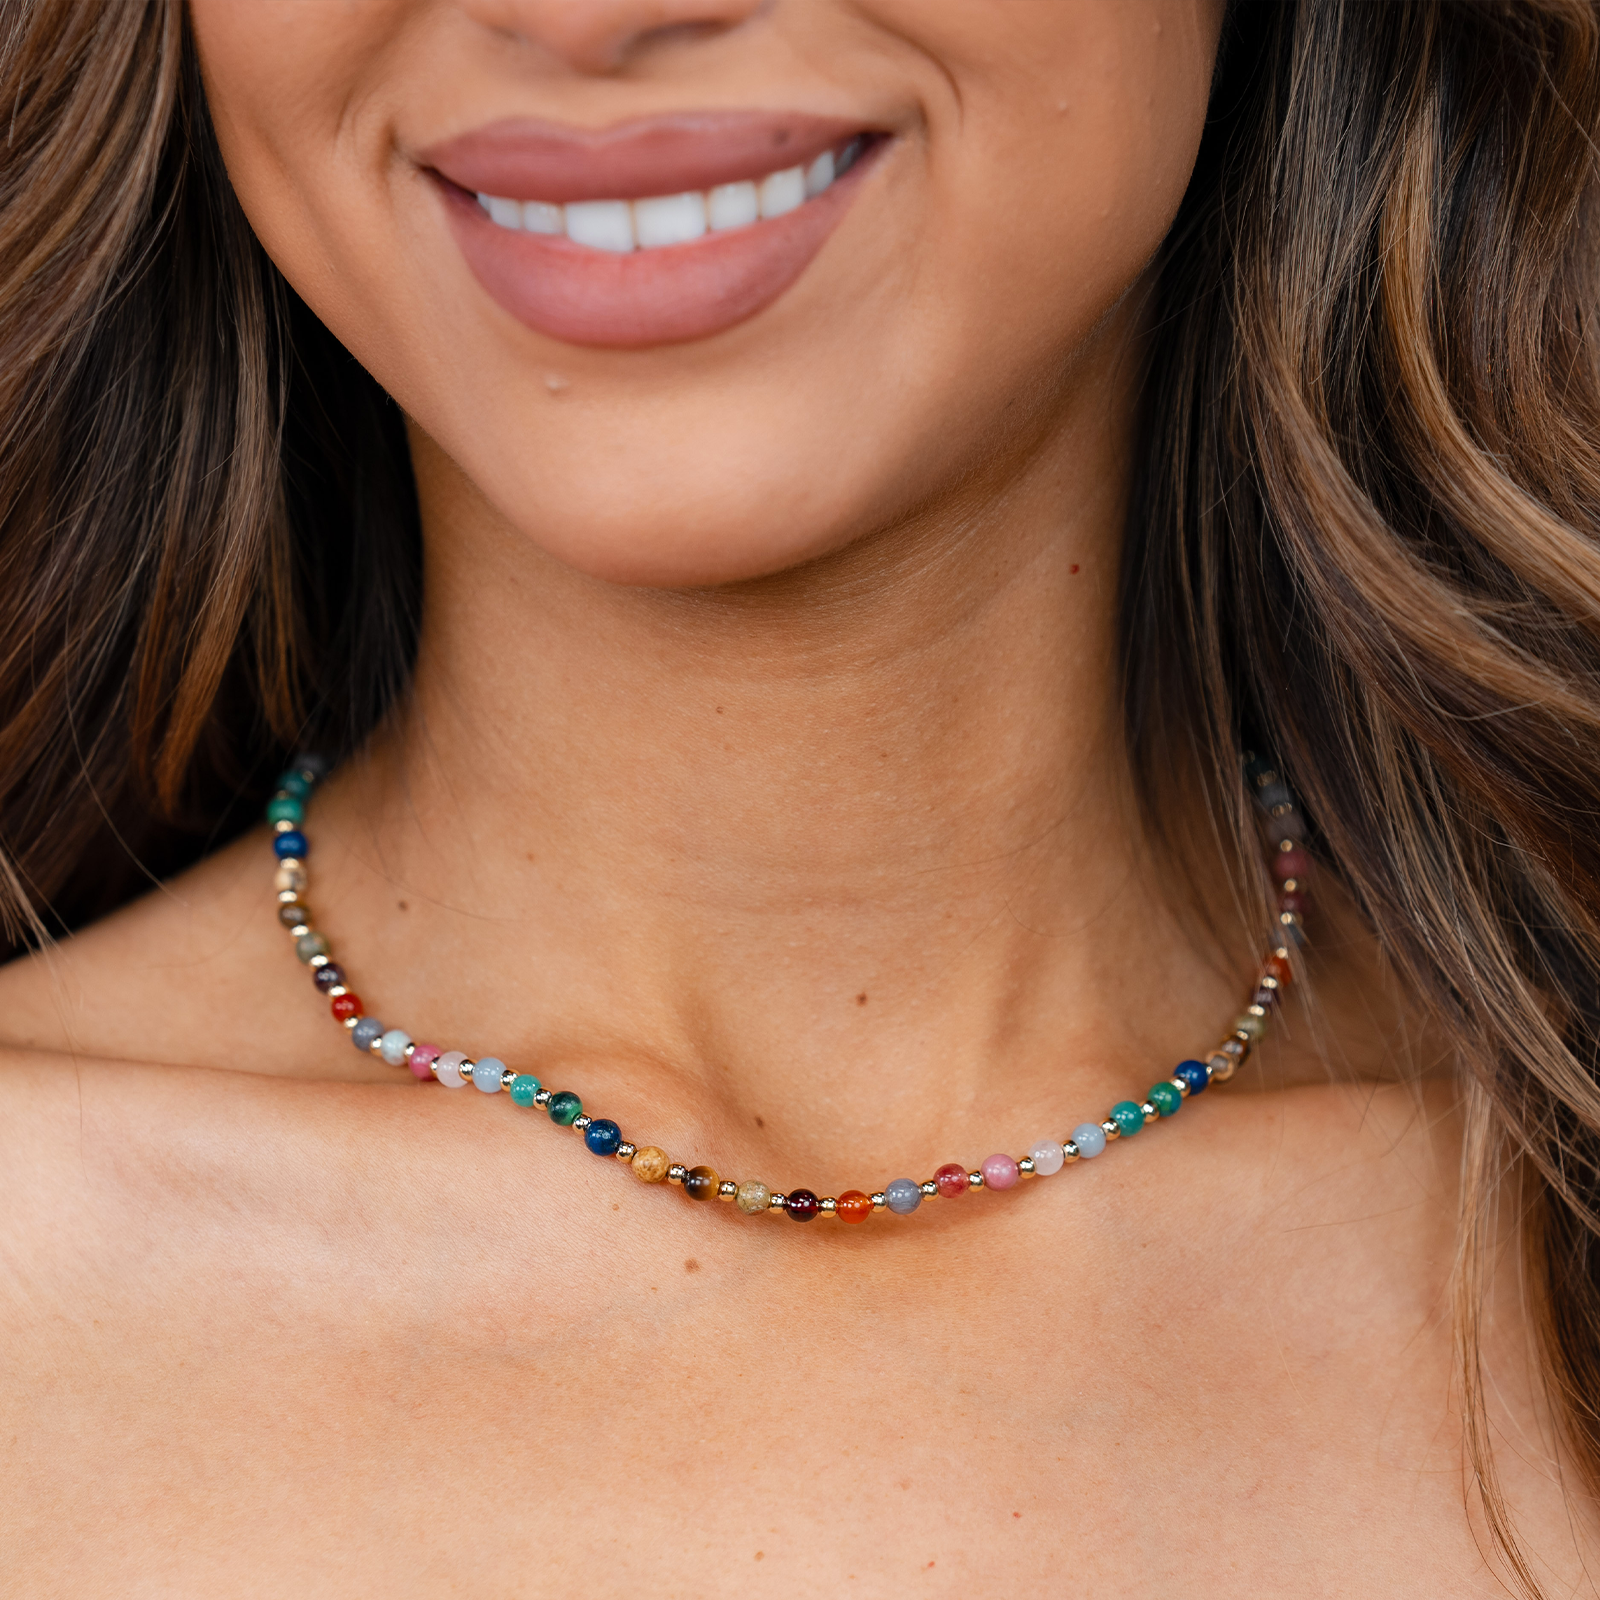 4mm multicolor stone and gold bead healing necklace with a gold chain